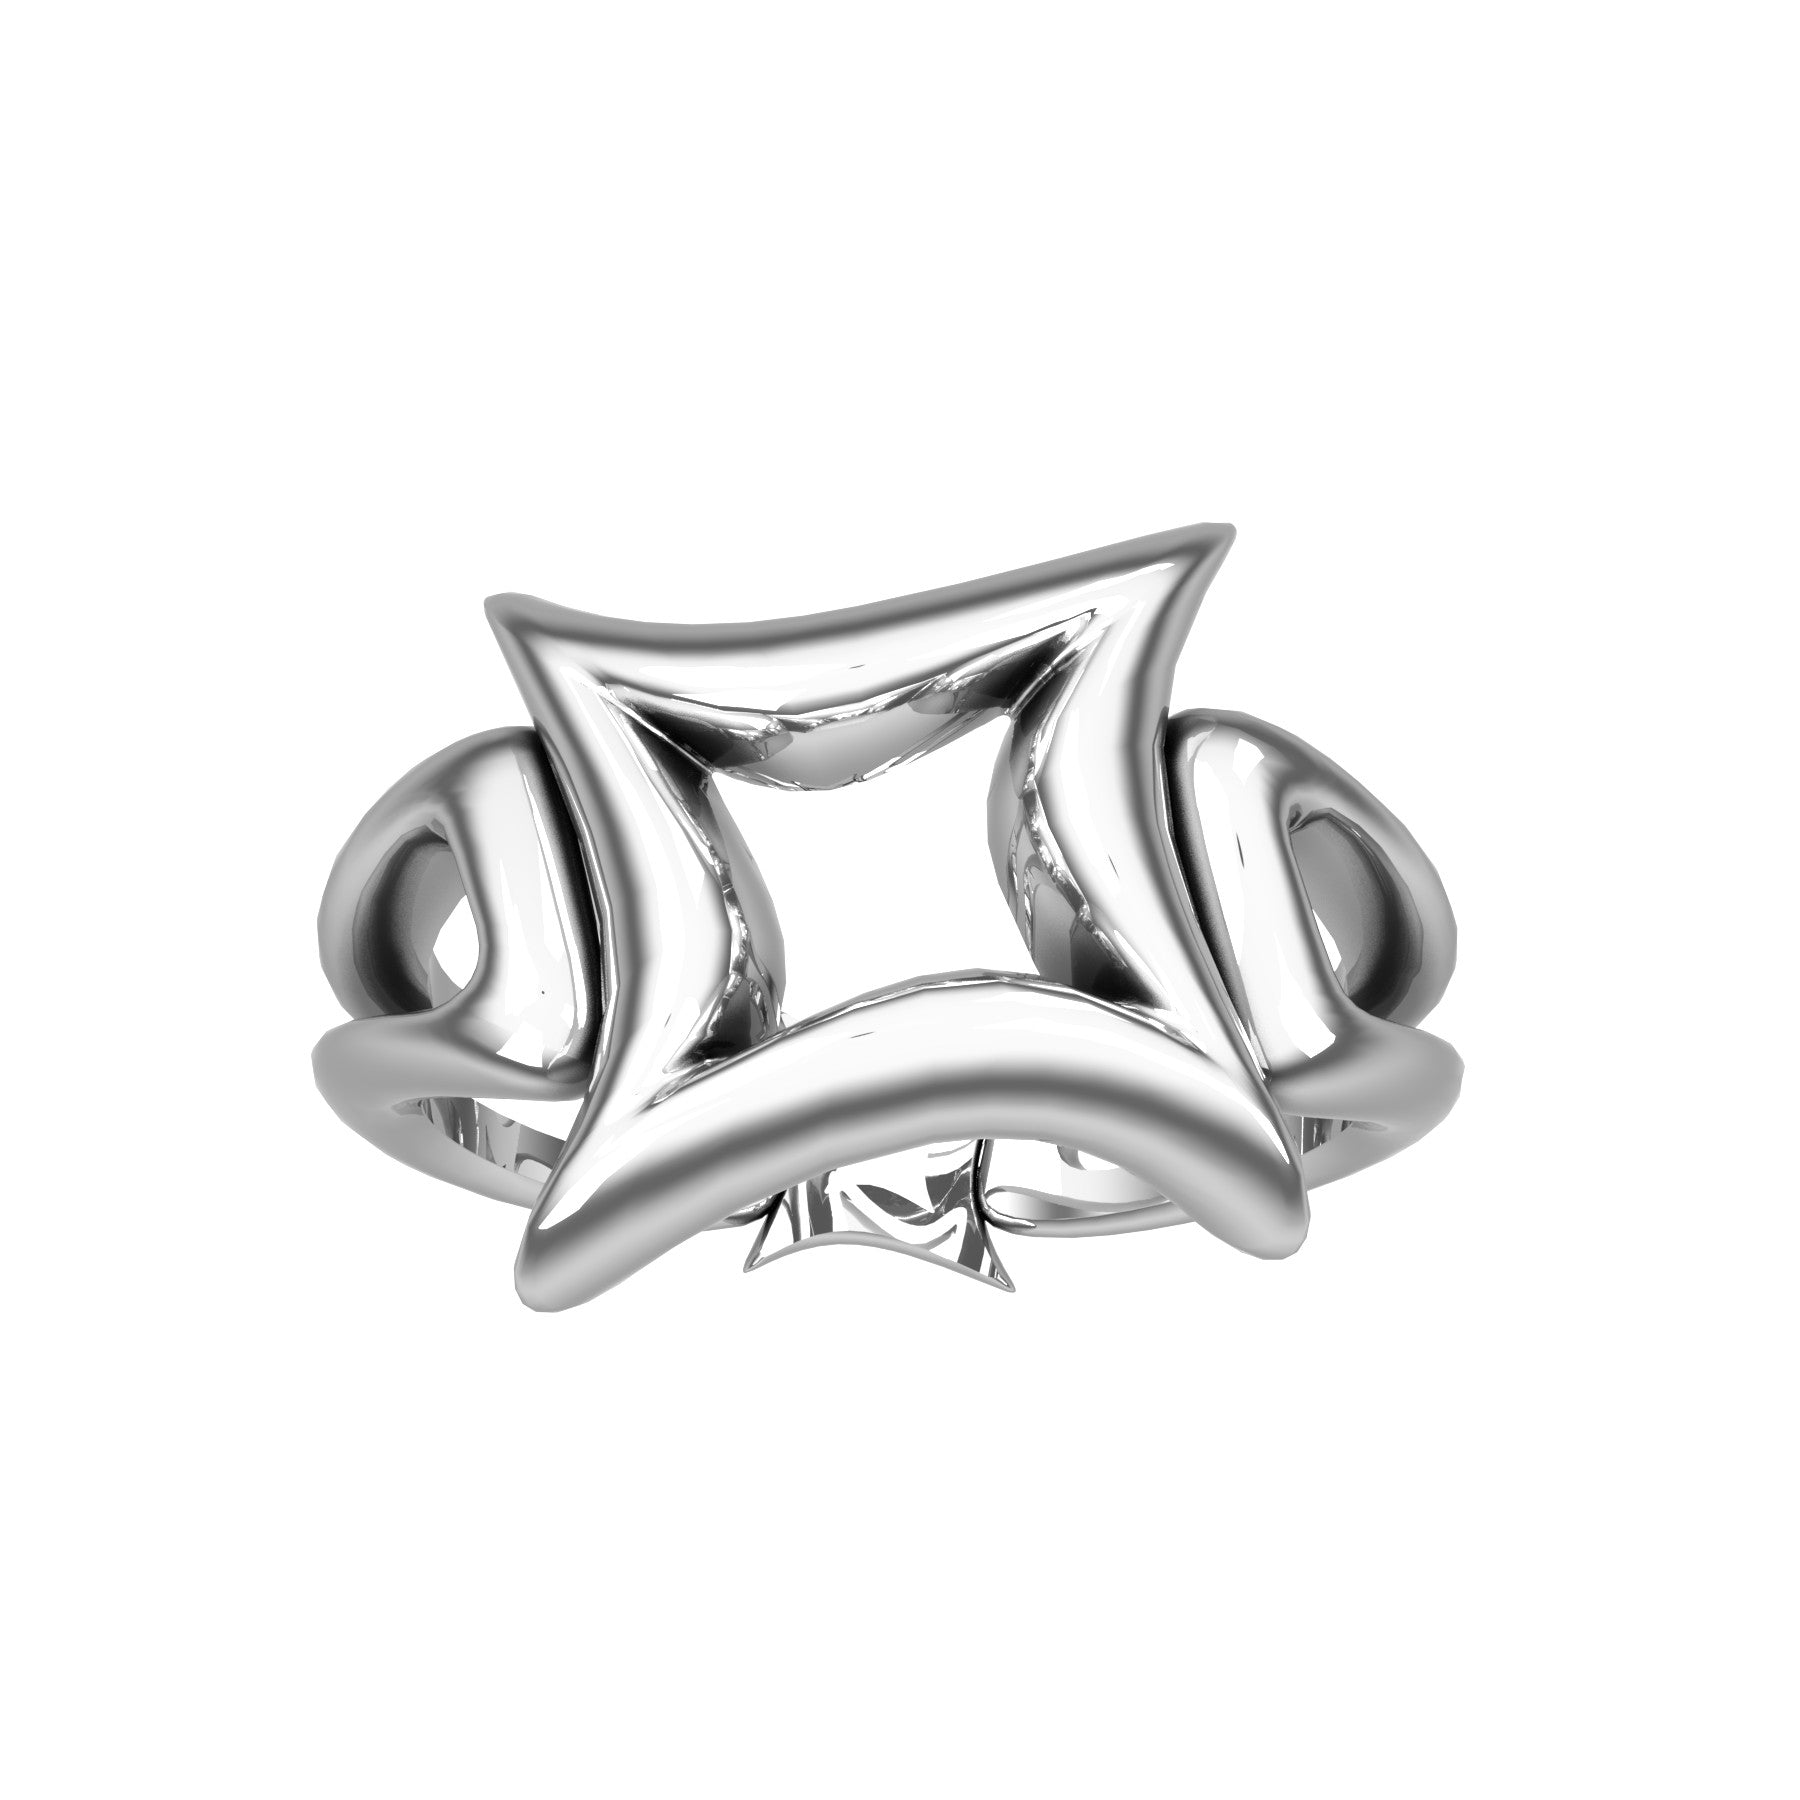 etoile bizarre ring, 18 K white gold, weight about 6,0 g. (0.21 oz), width 13,5 mm max